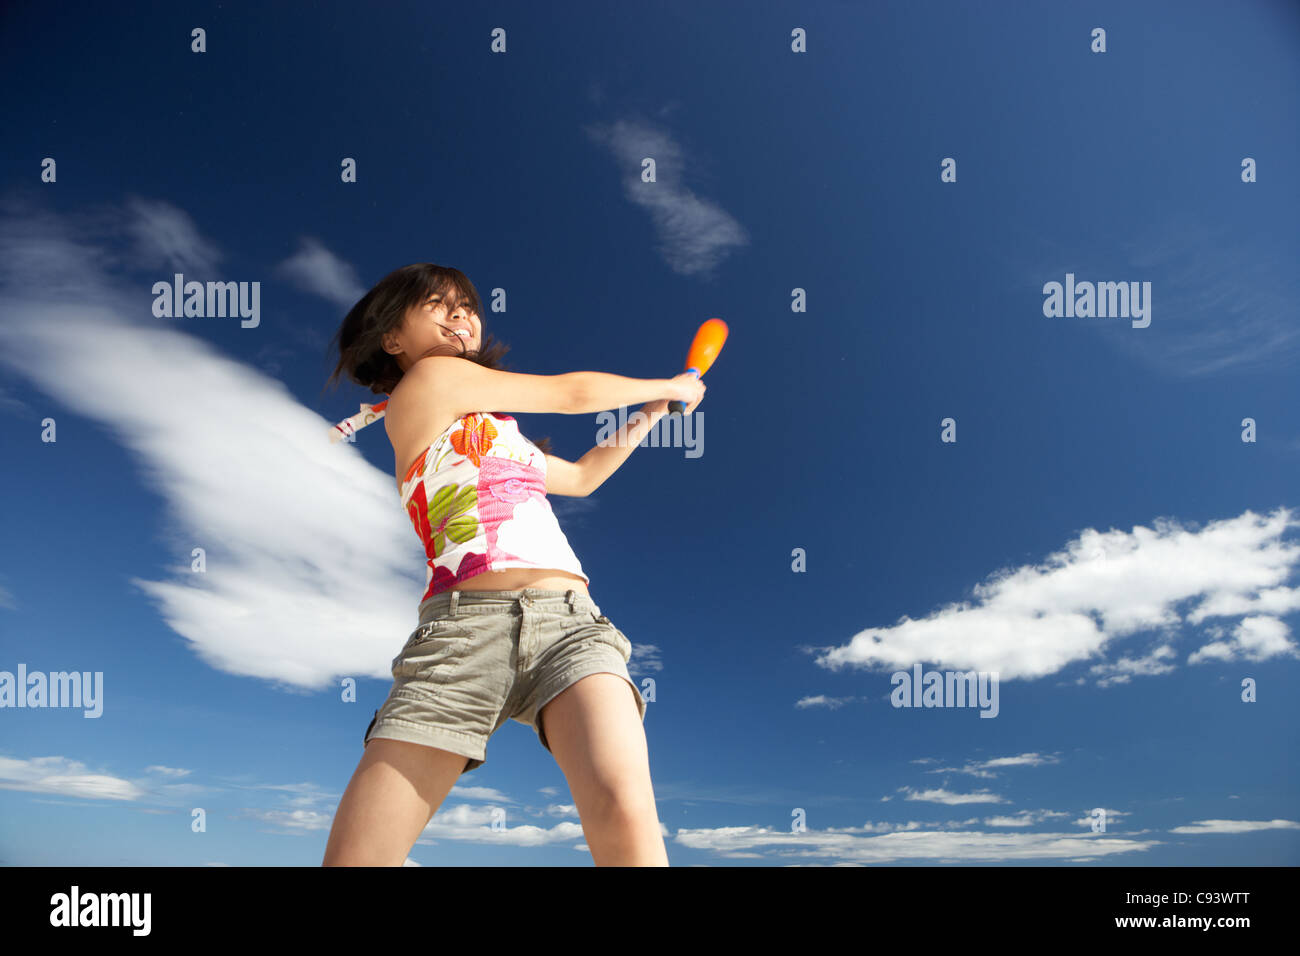 Teenage girl playing baseball on beach Banque D'Images